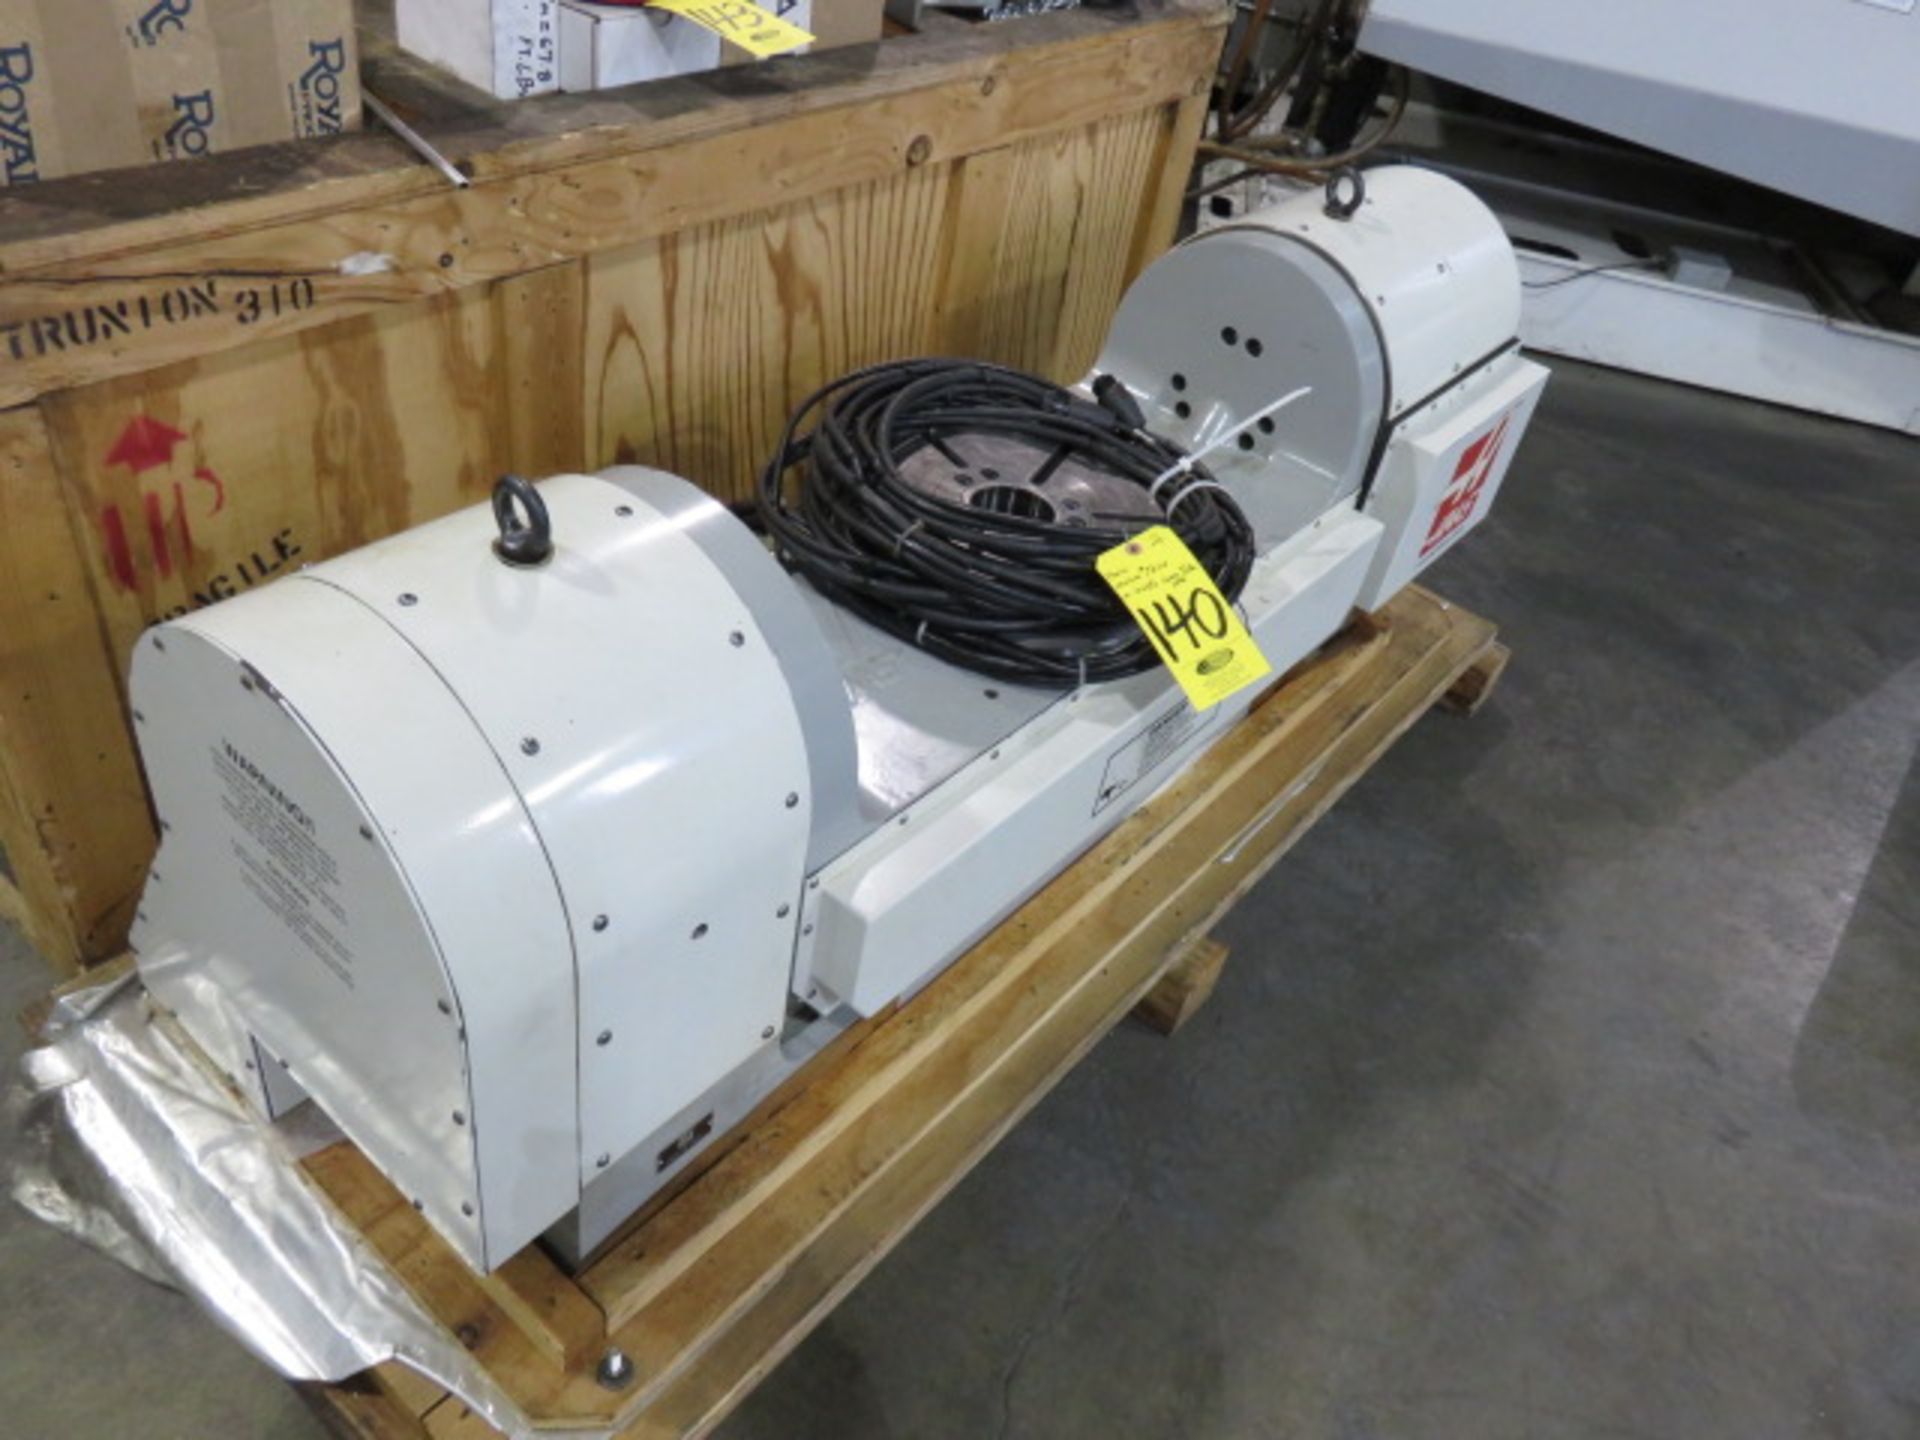 2004 HAAS TR310 TRUNNION, S/N 900840, USED ON LOT 135 - Image 2 of 2